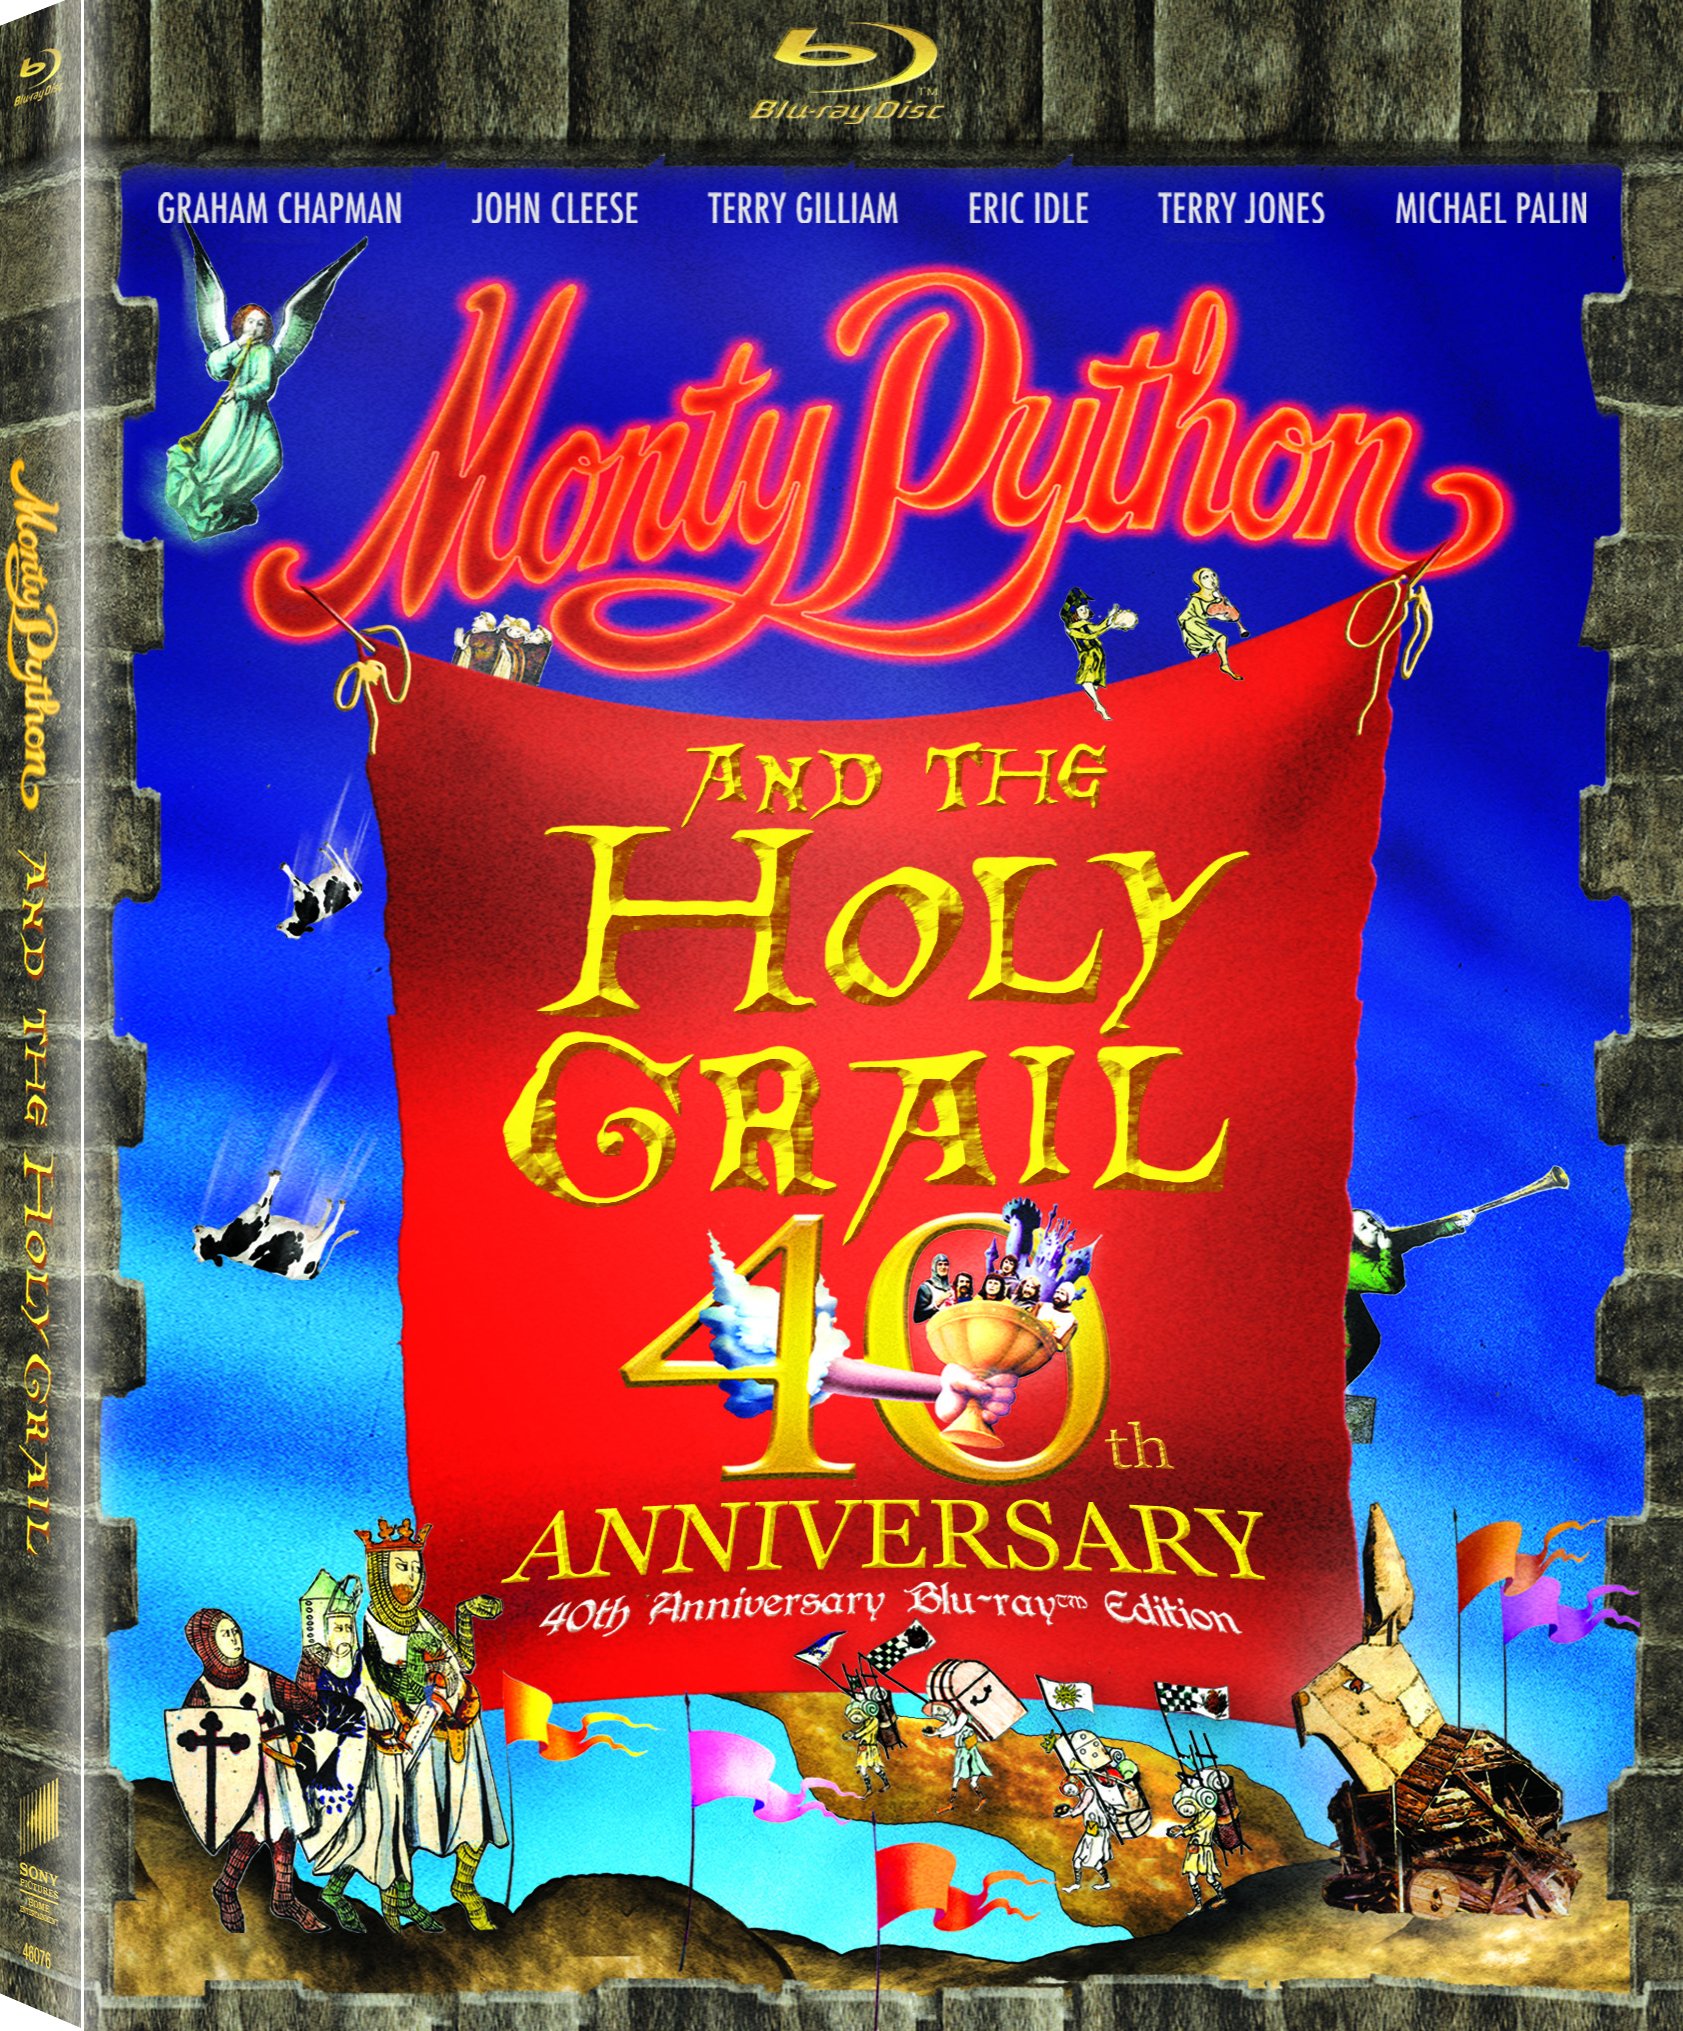 Monty Python and the Holy Grail DVD Release Date1683 x 2031